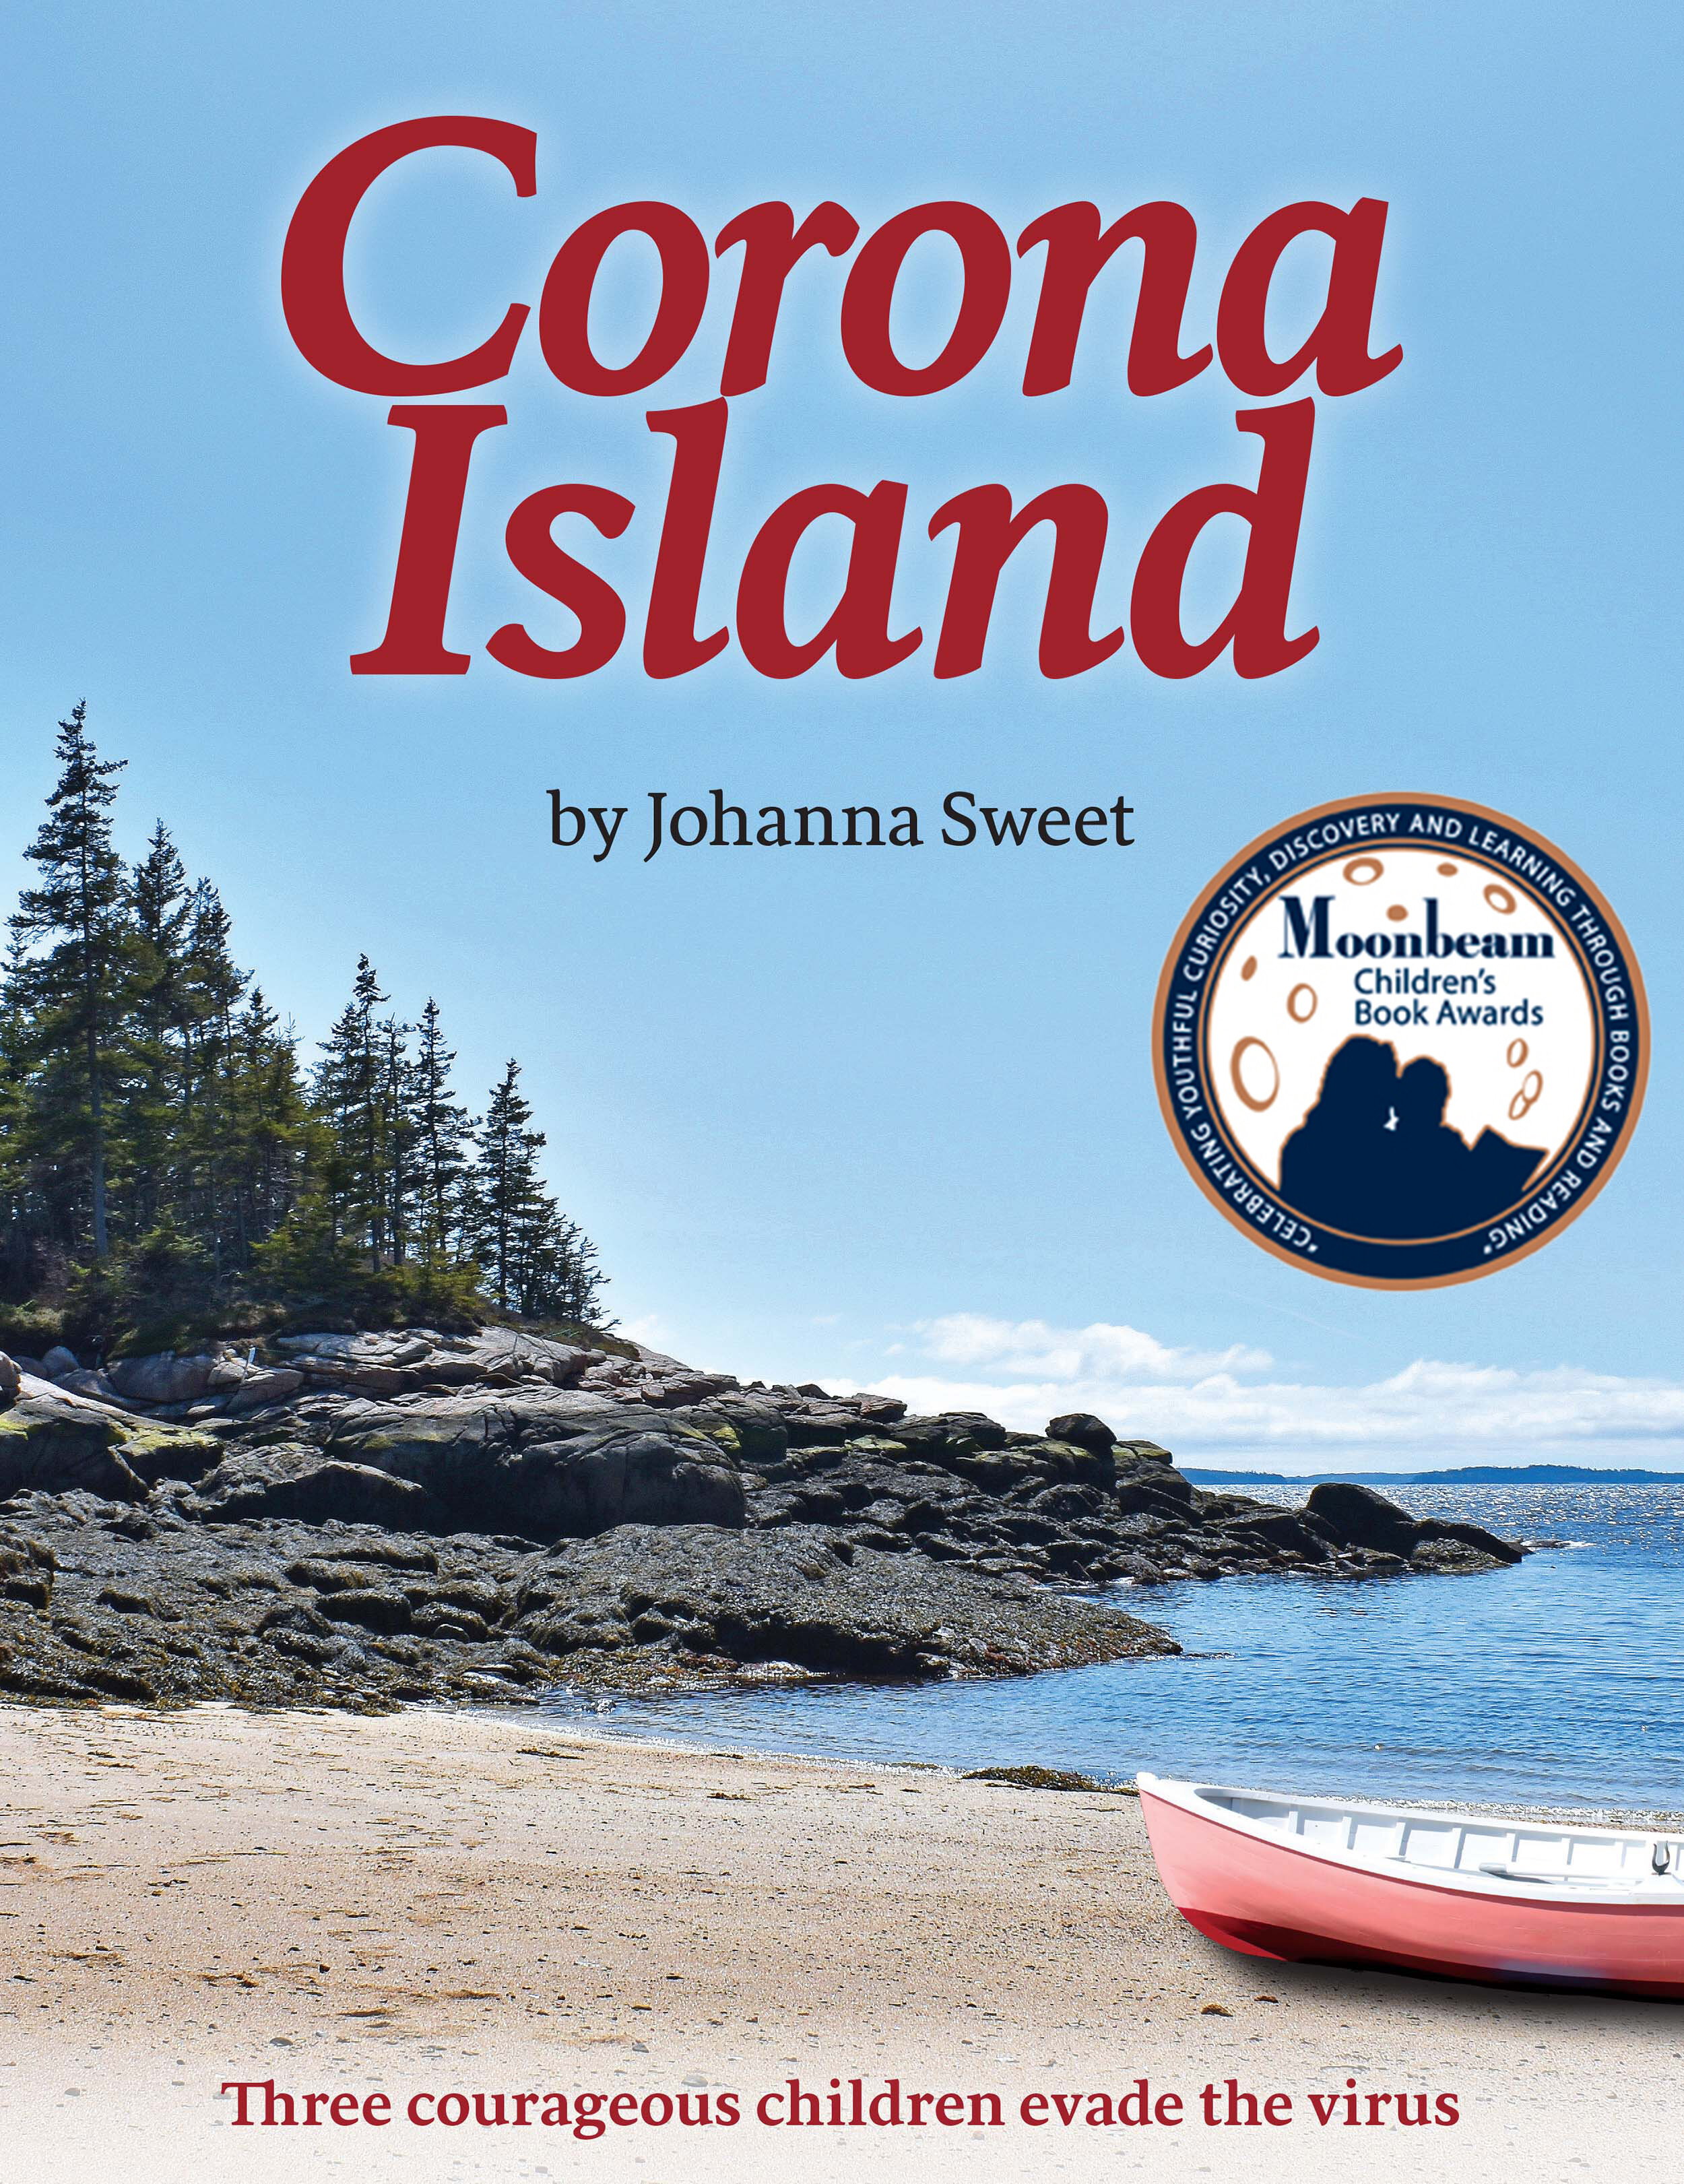 Corona Island front cover larger with seal.jpg